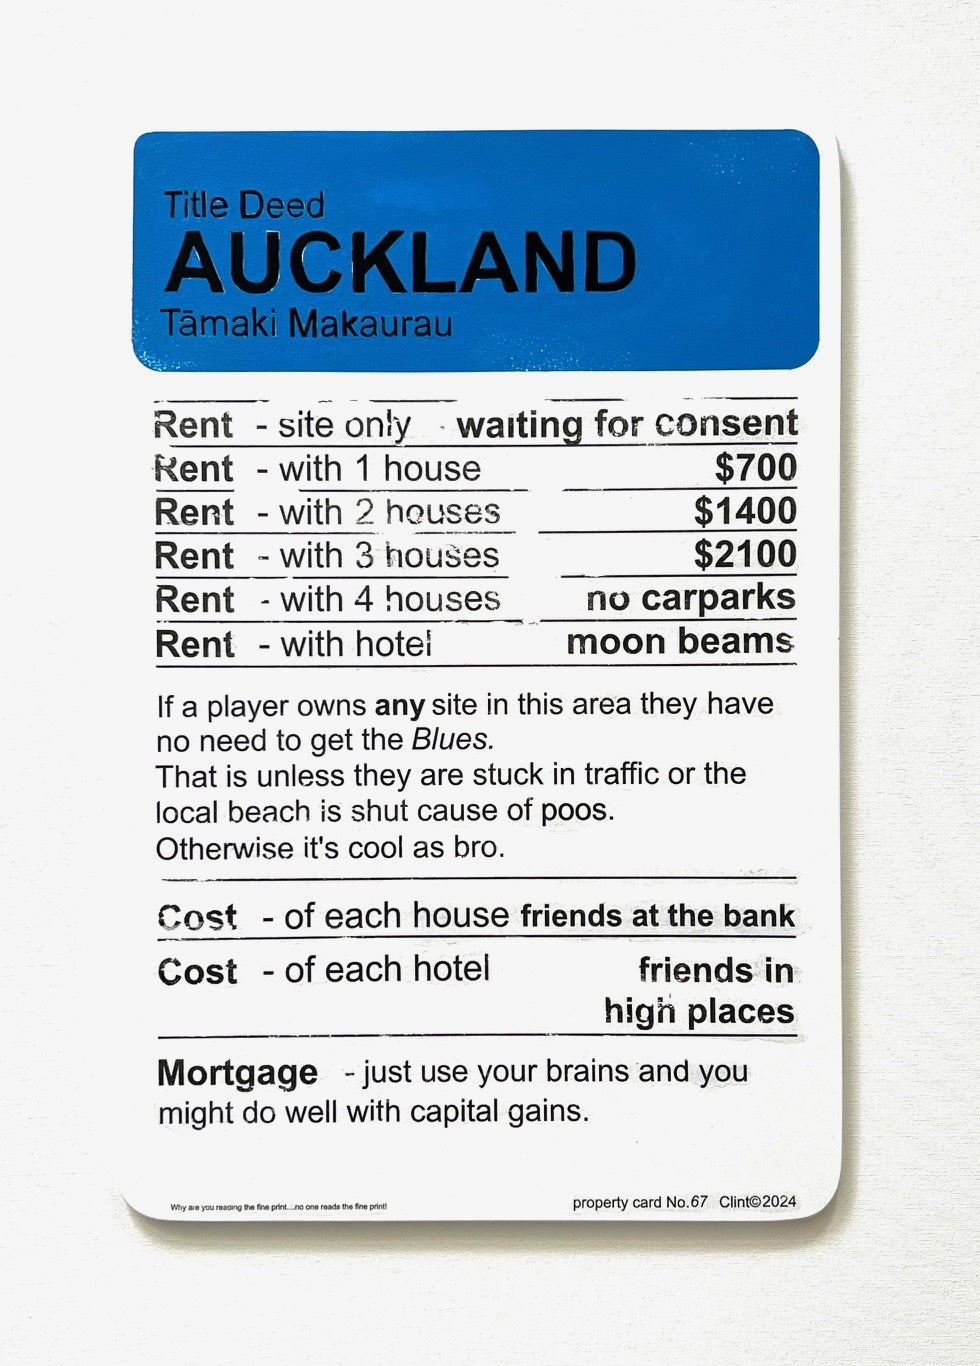 Title Deed Auckland